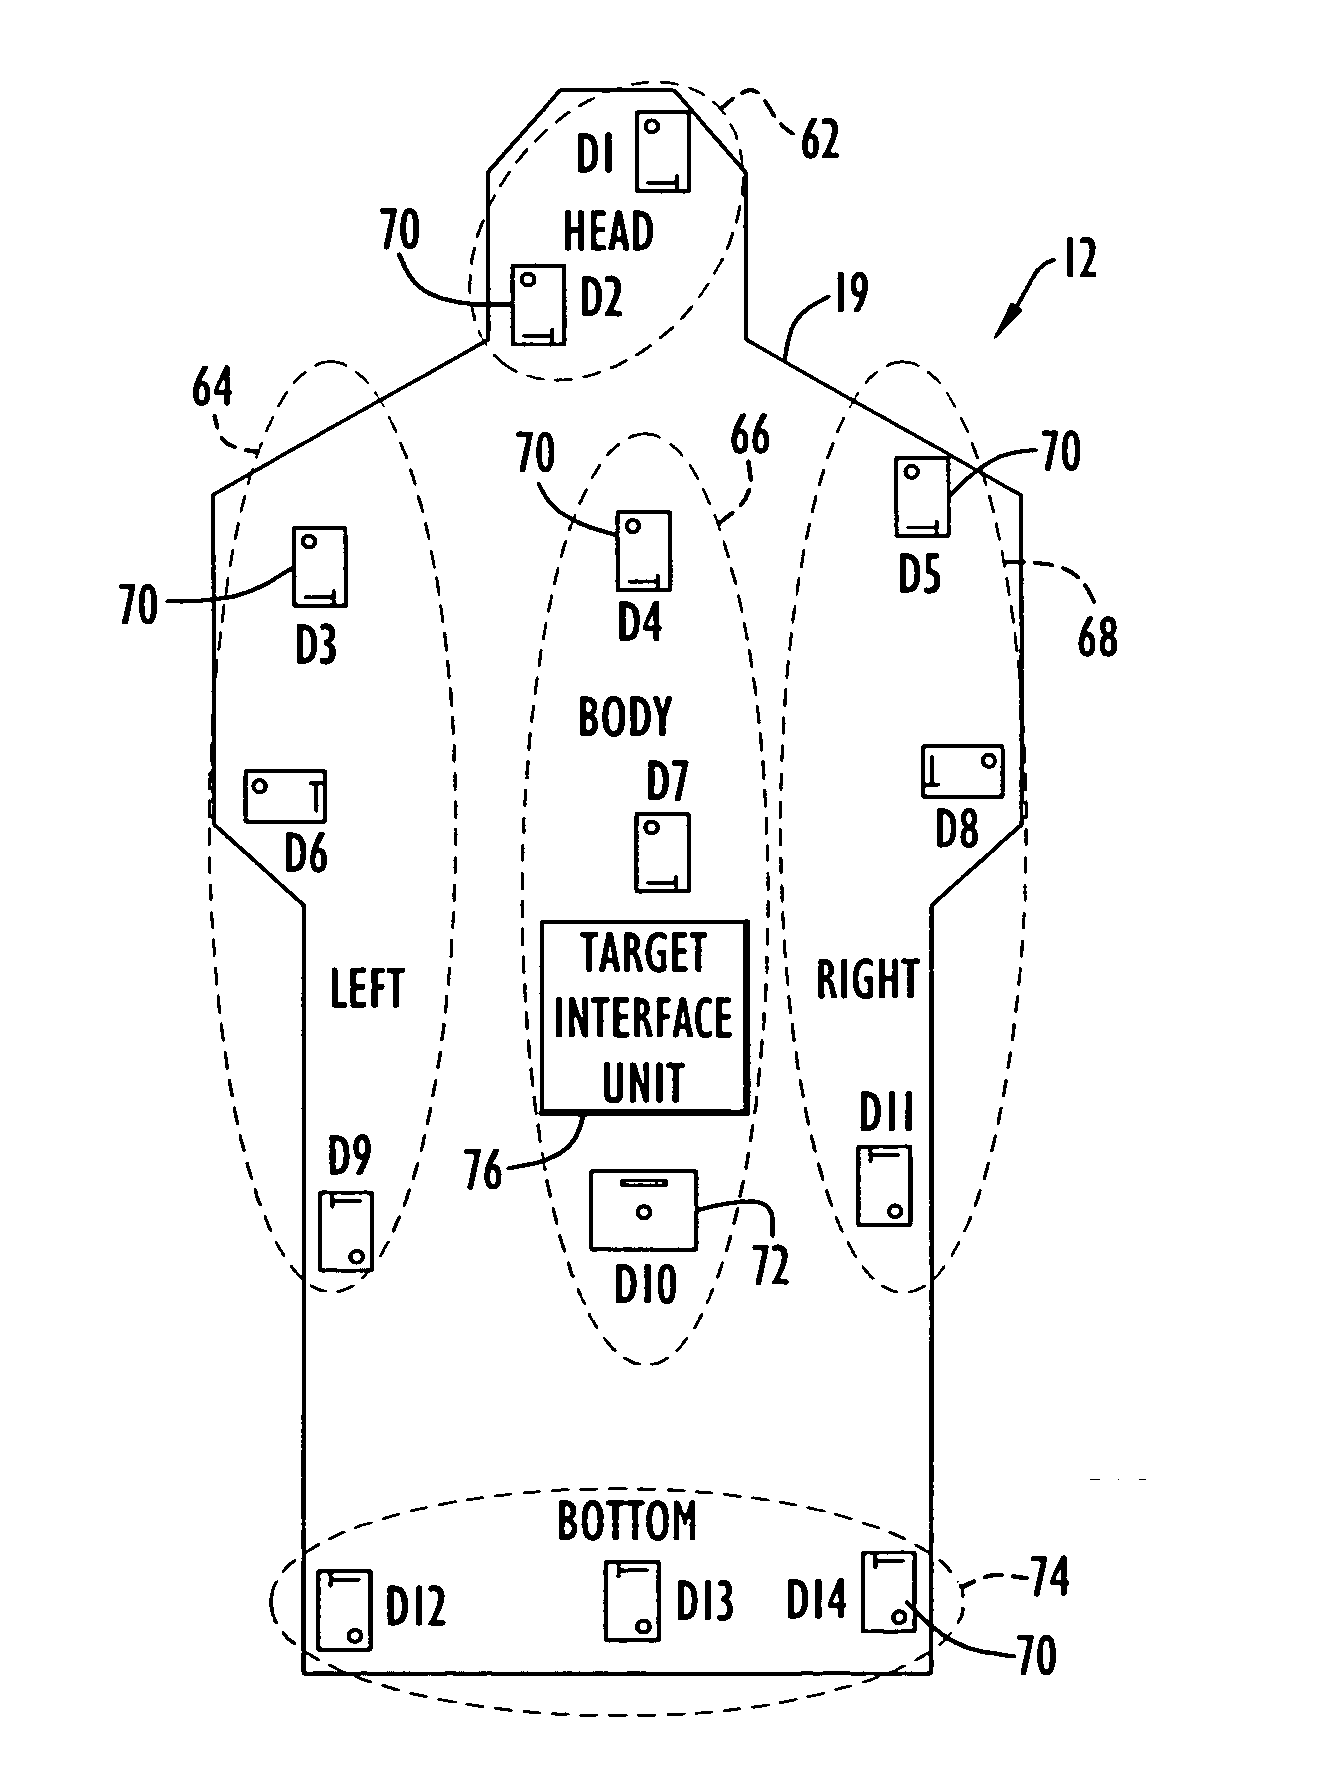 Firearm laser training system and method employing various targets to simulate training scenarios